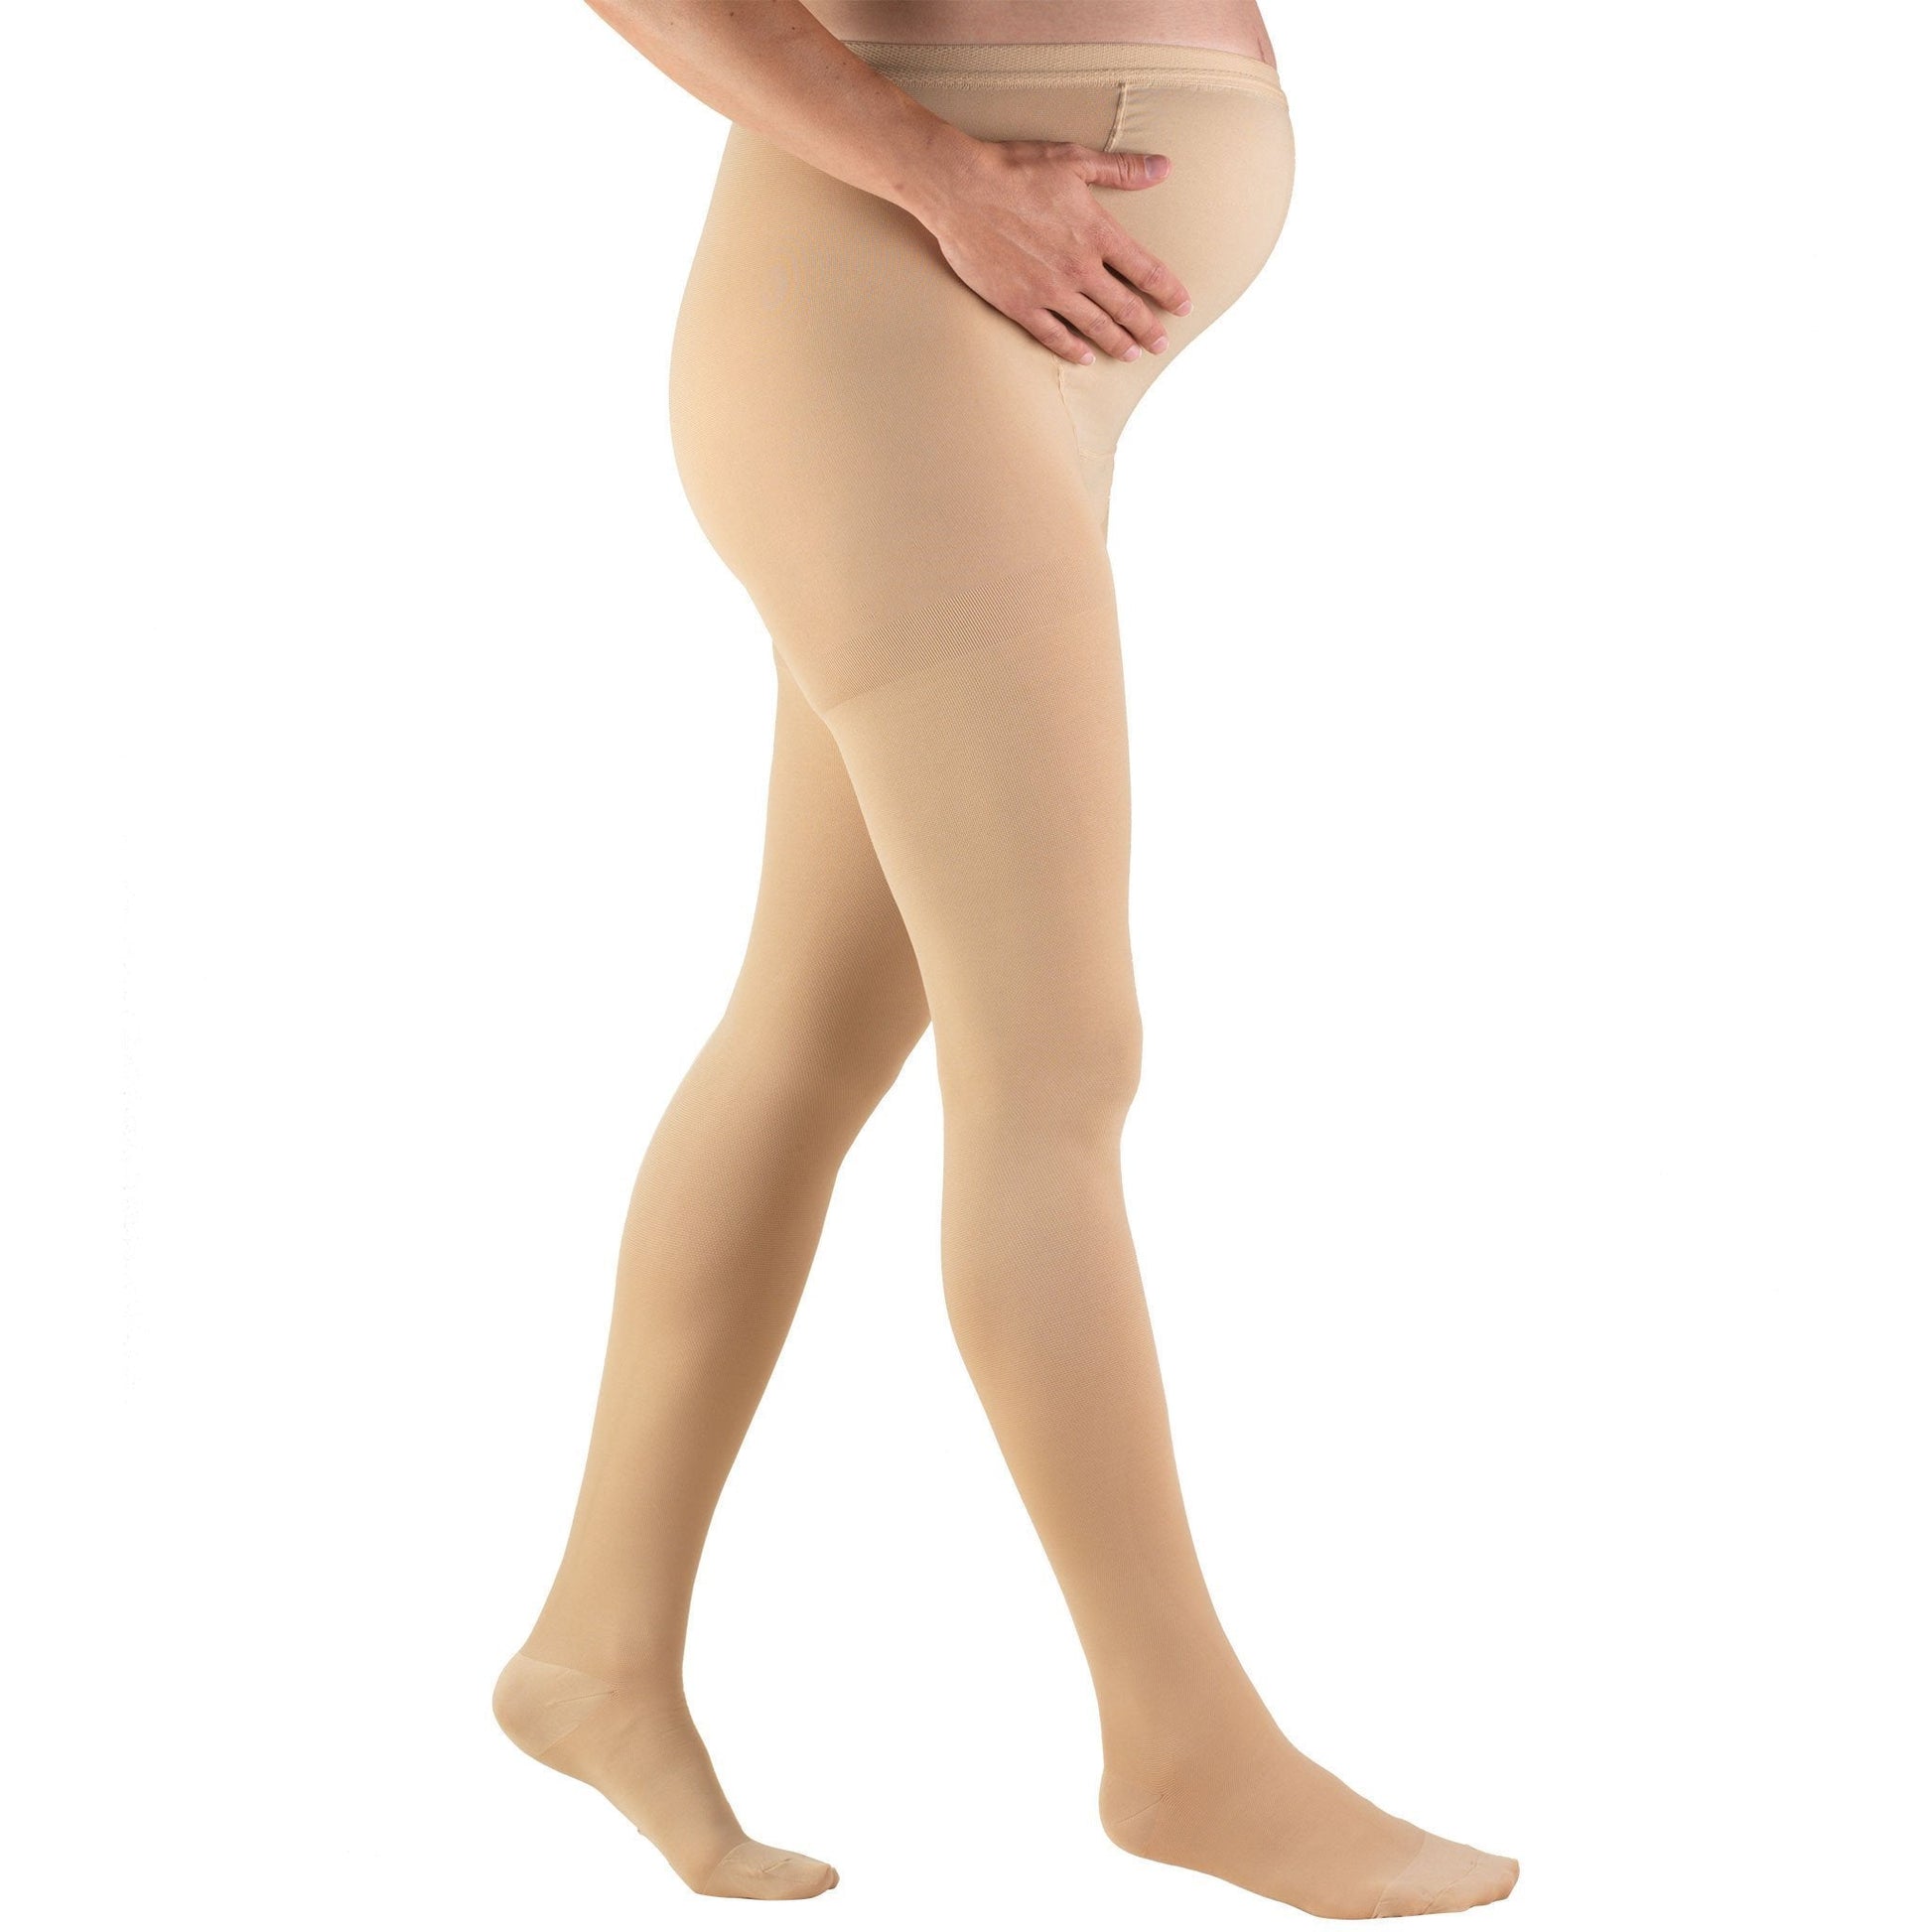 JOBST Maternity Opaque Compression Waist High Pantyhose Stockings, Closed  Toe, 20-30 mmHg Moderate Support for Swollen Legs During Pregnancy